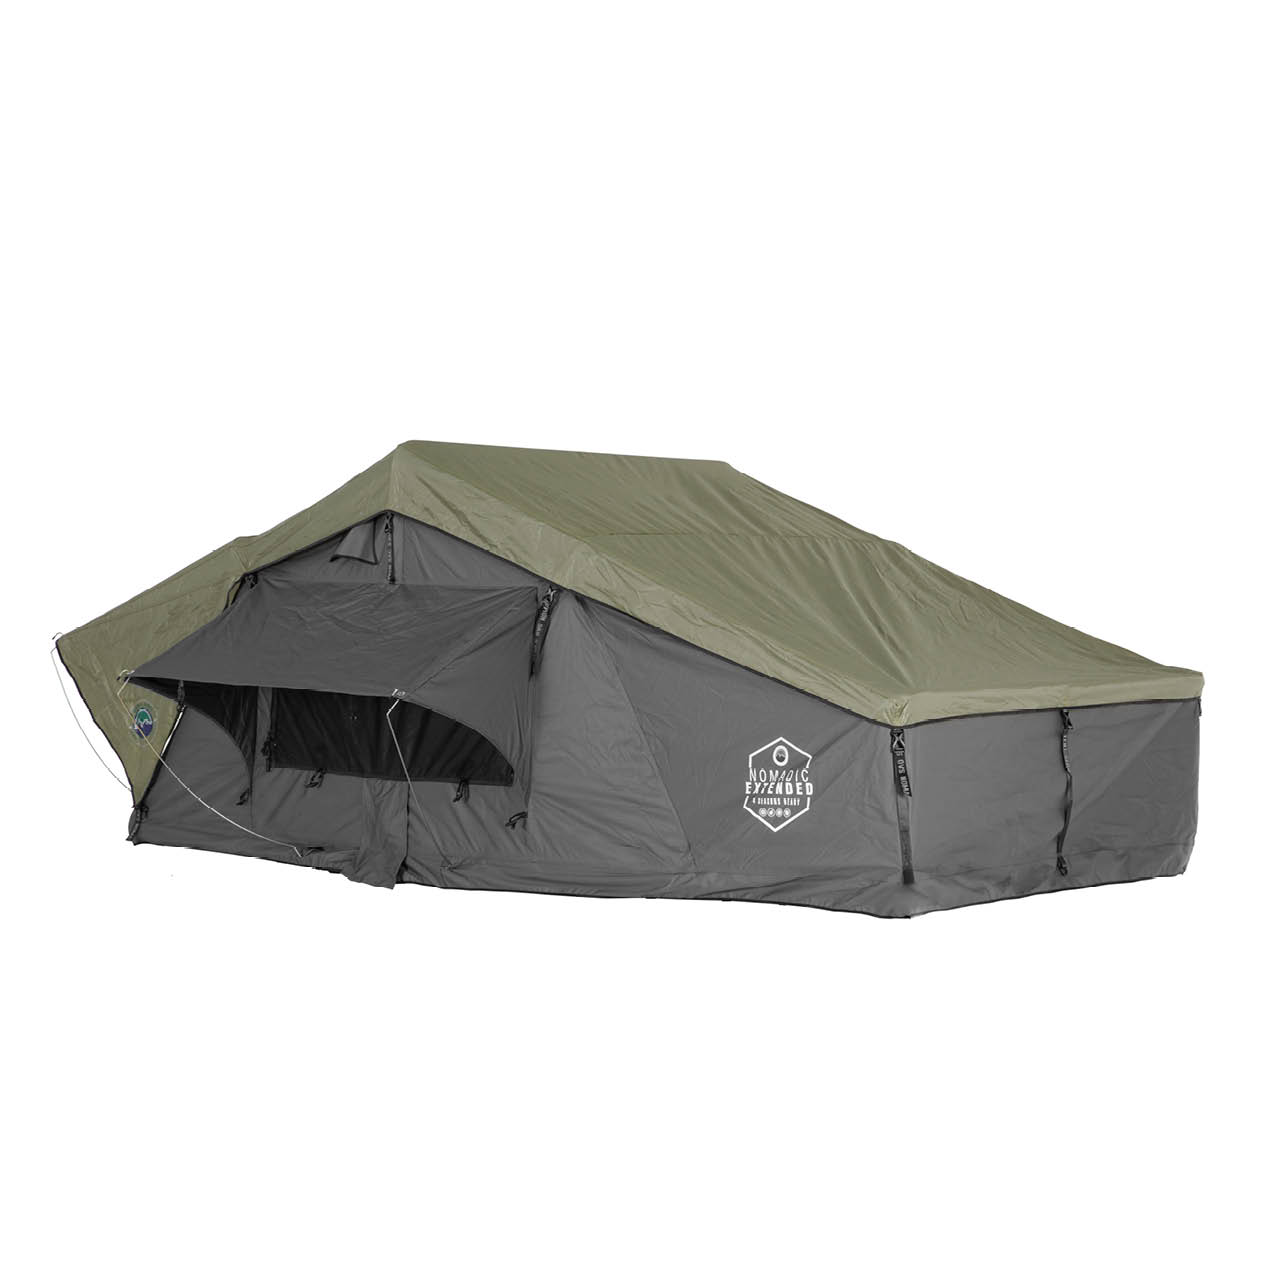 Nomadic N3E - Soft Sided Roof Top Tent, 3 Person, Grey Body & Green Rainfly